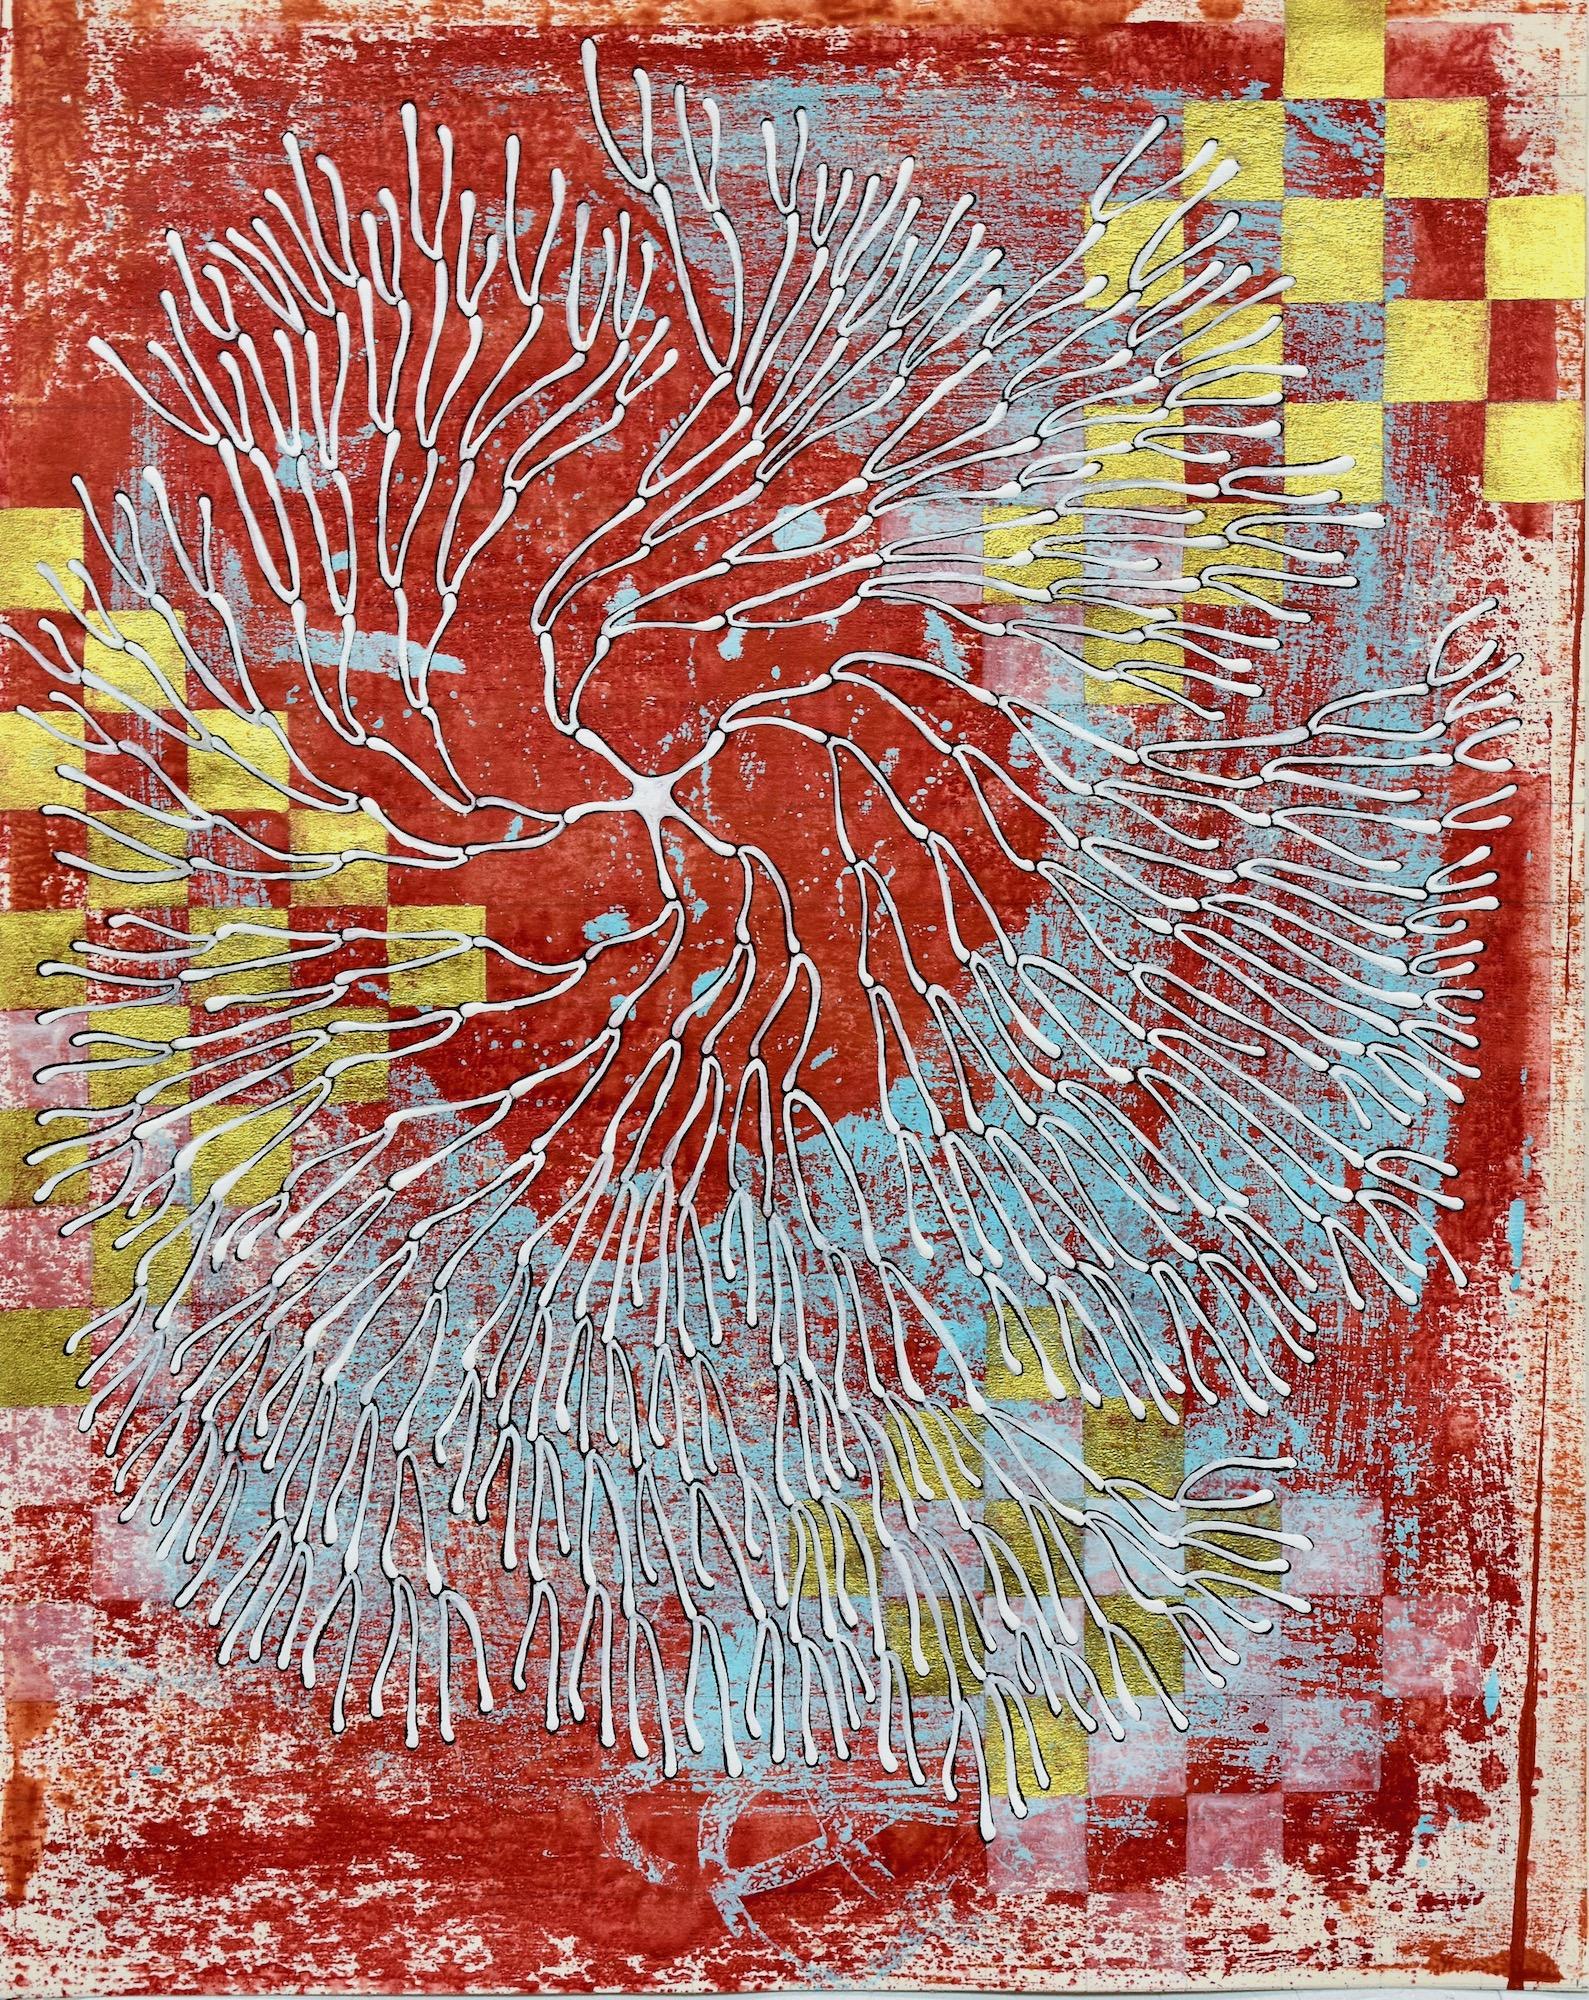 "Exponential 21", abstract, mixed media, painting, teal, red, metallic gold - Mixed Media Art by Denise Driscoll